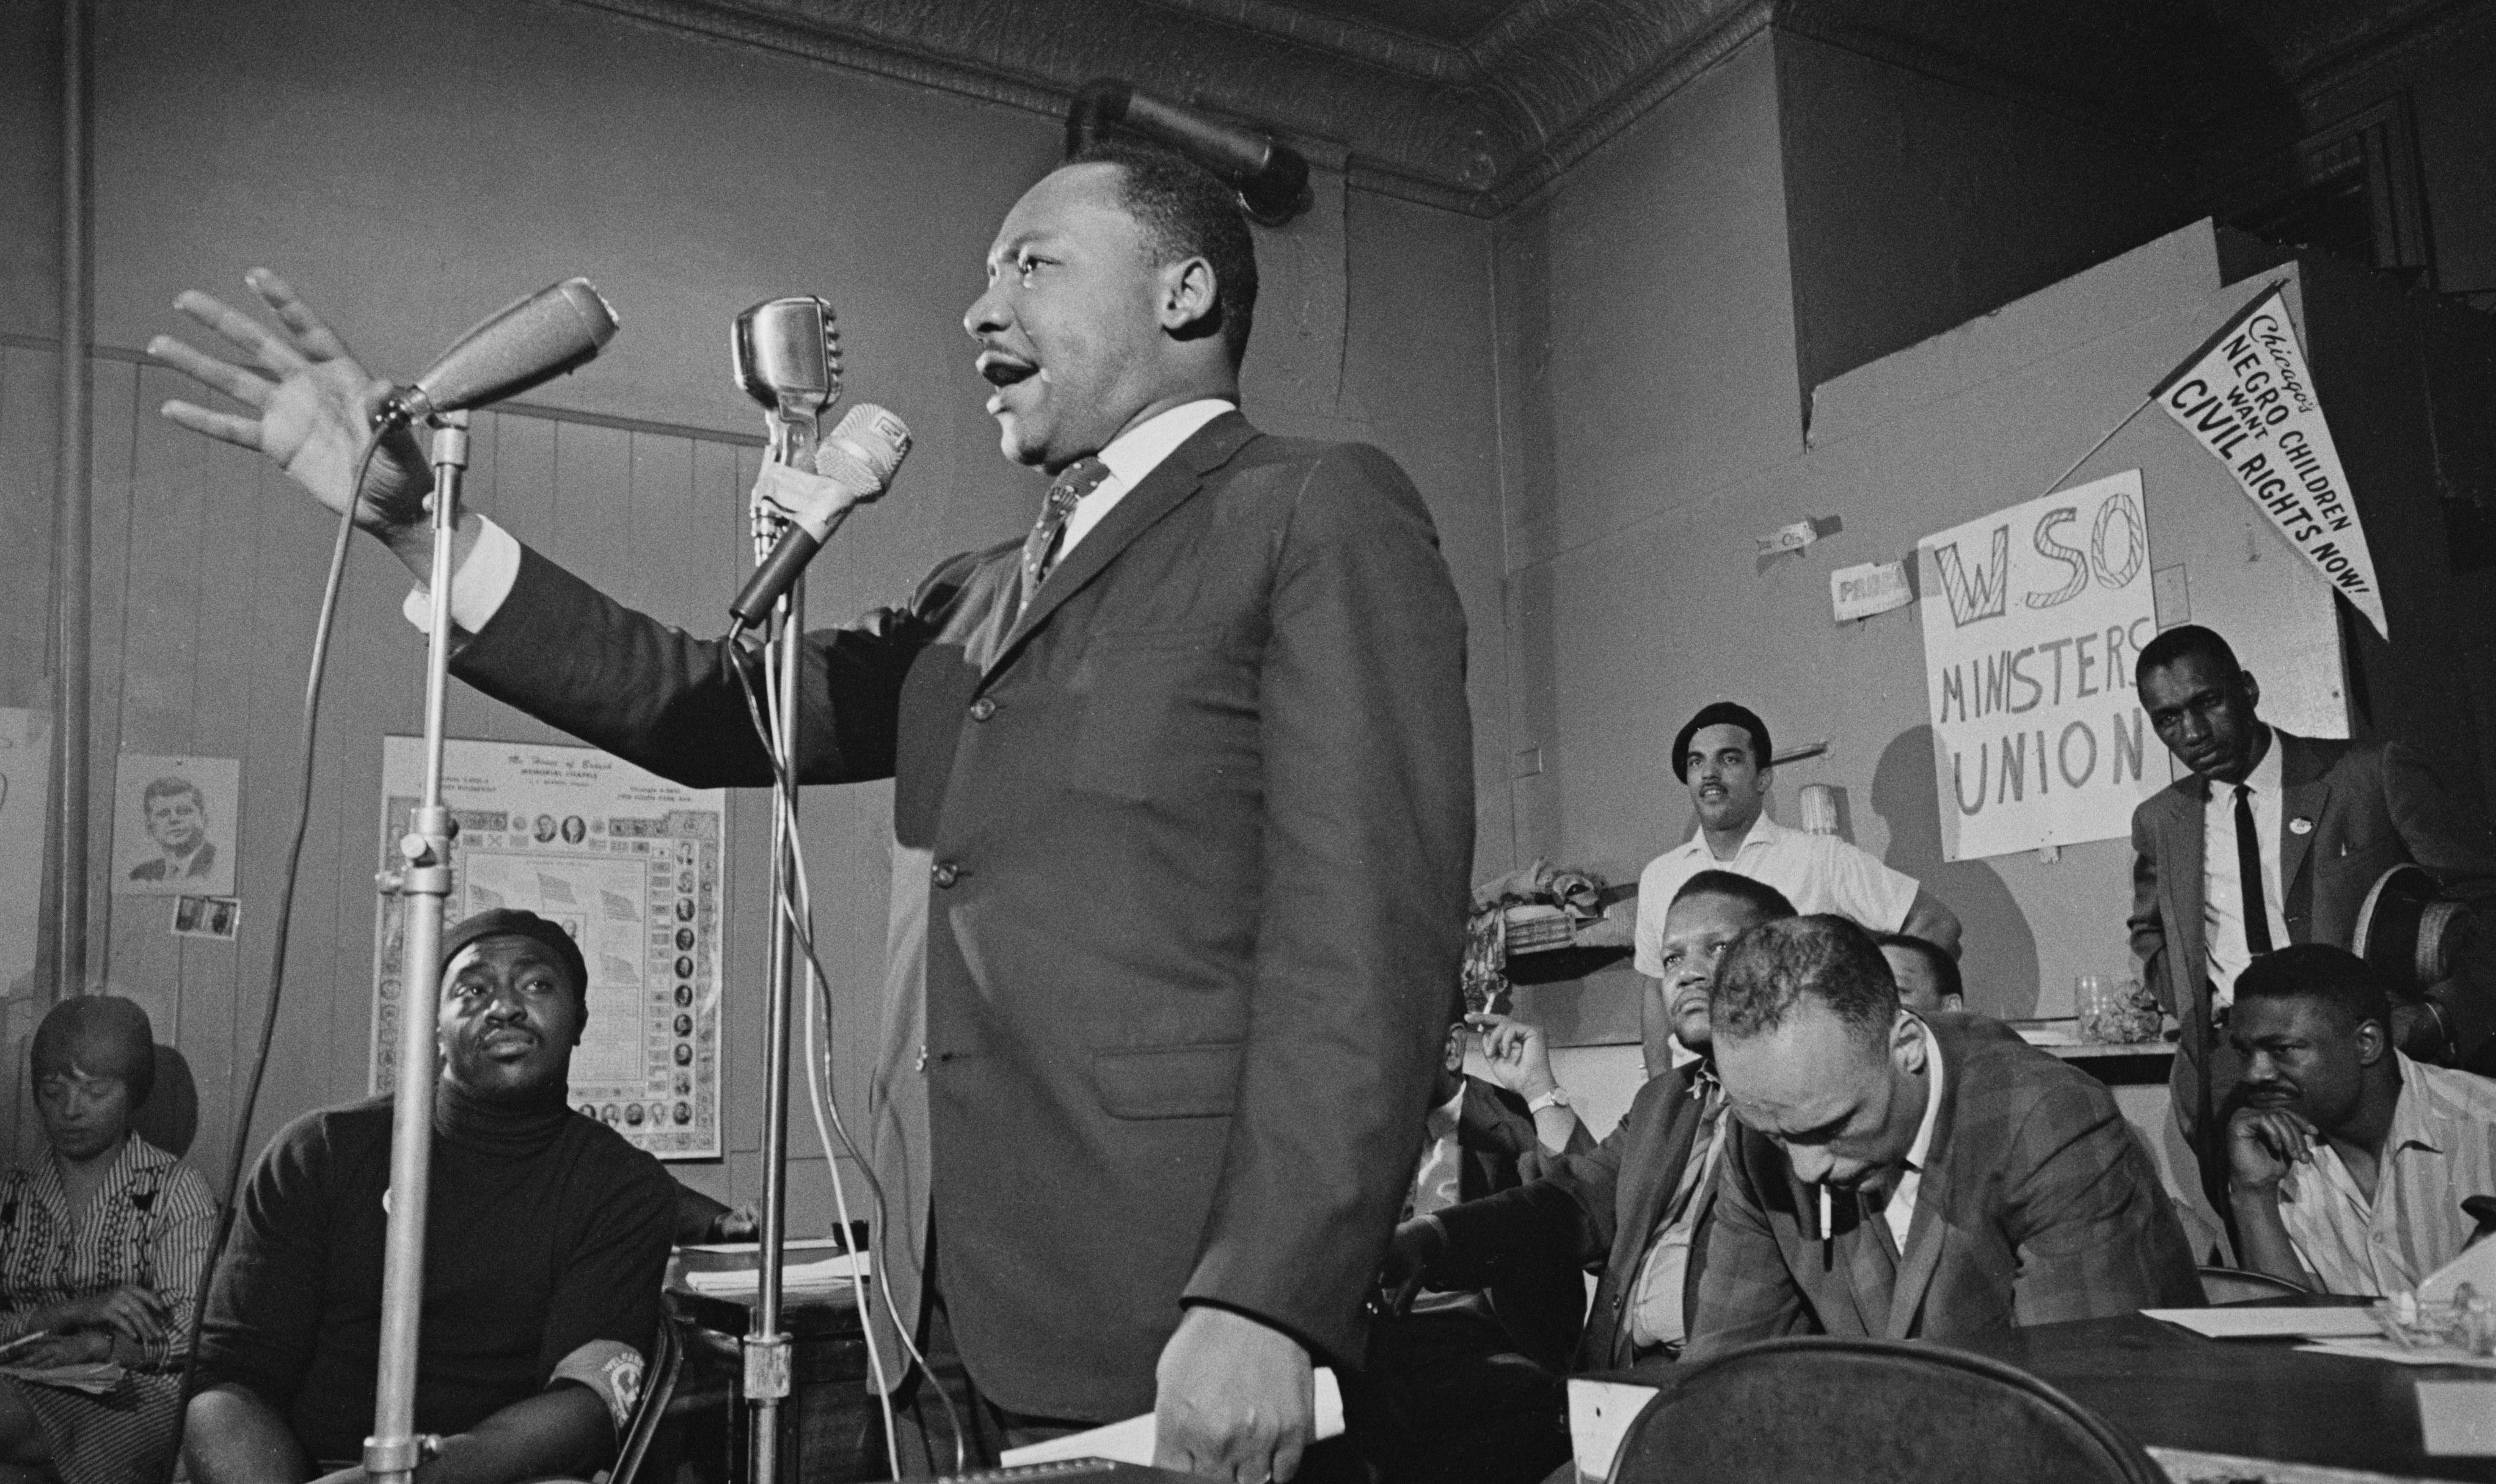 Martin Luther King Jr. addresses a meeting in Chicago, Illinois on May 27, 1966.